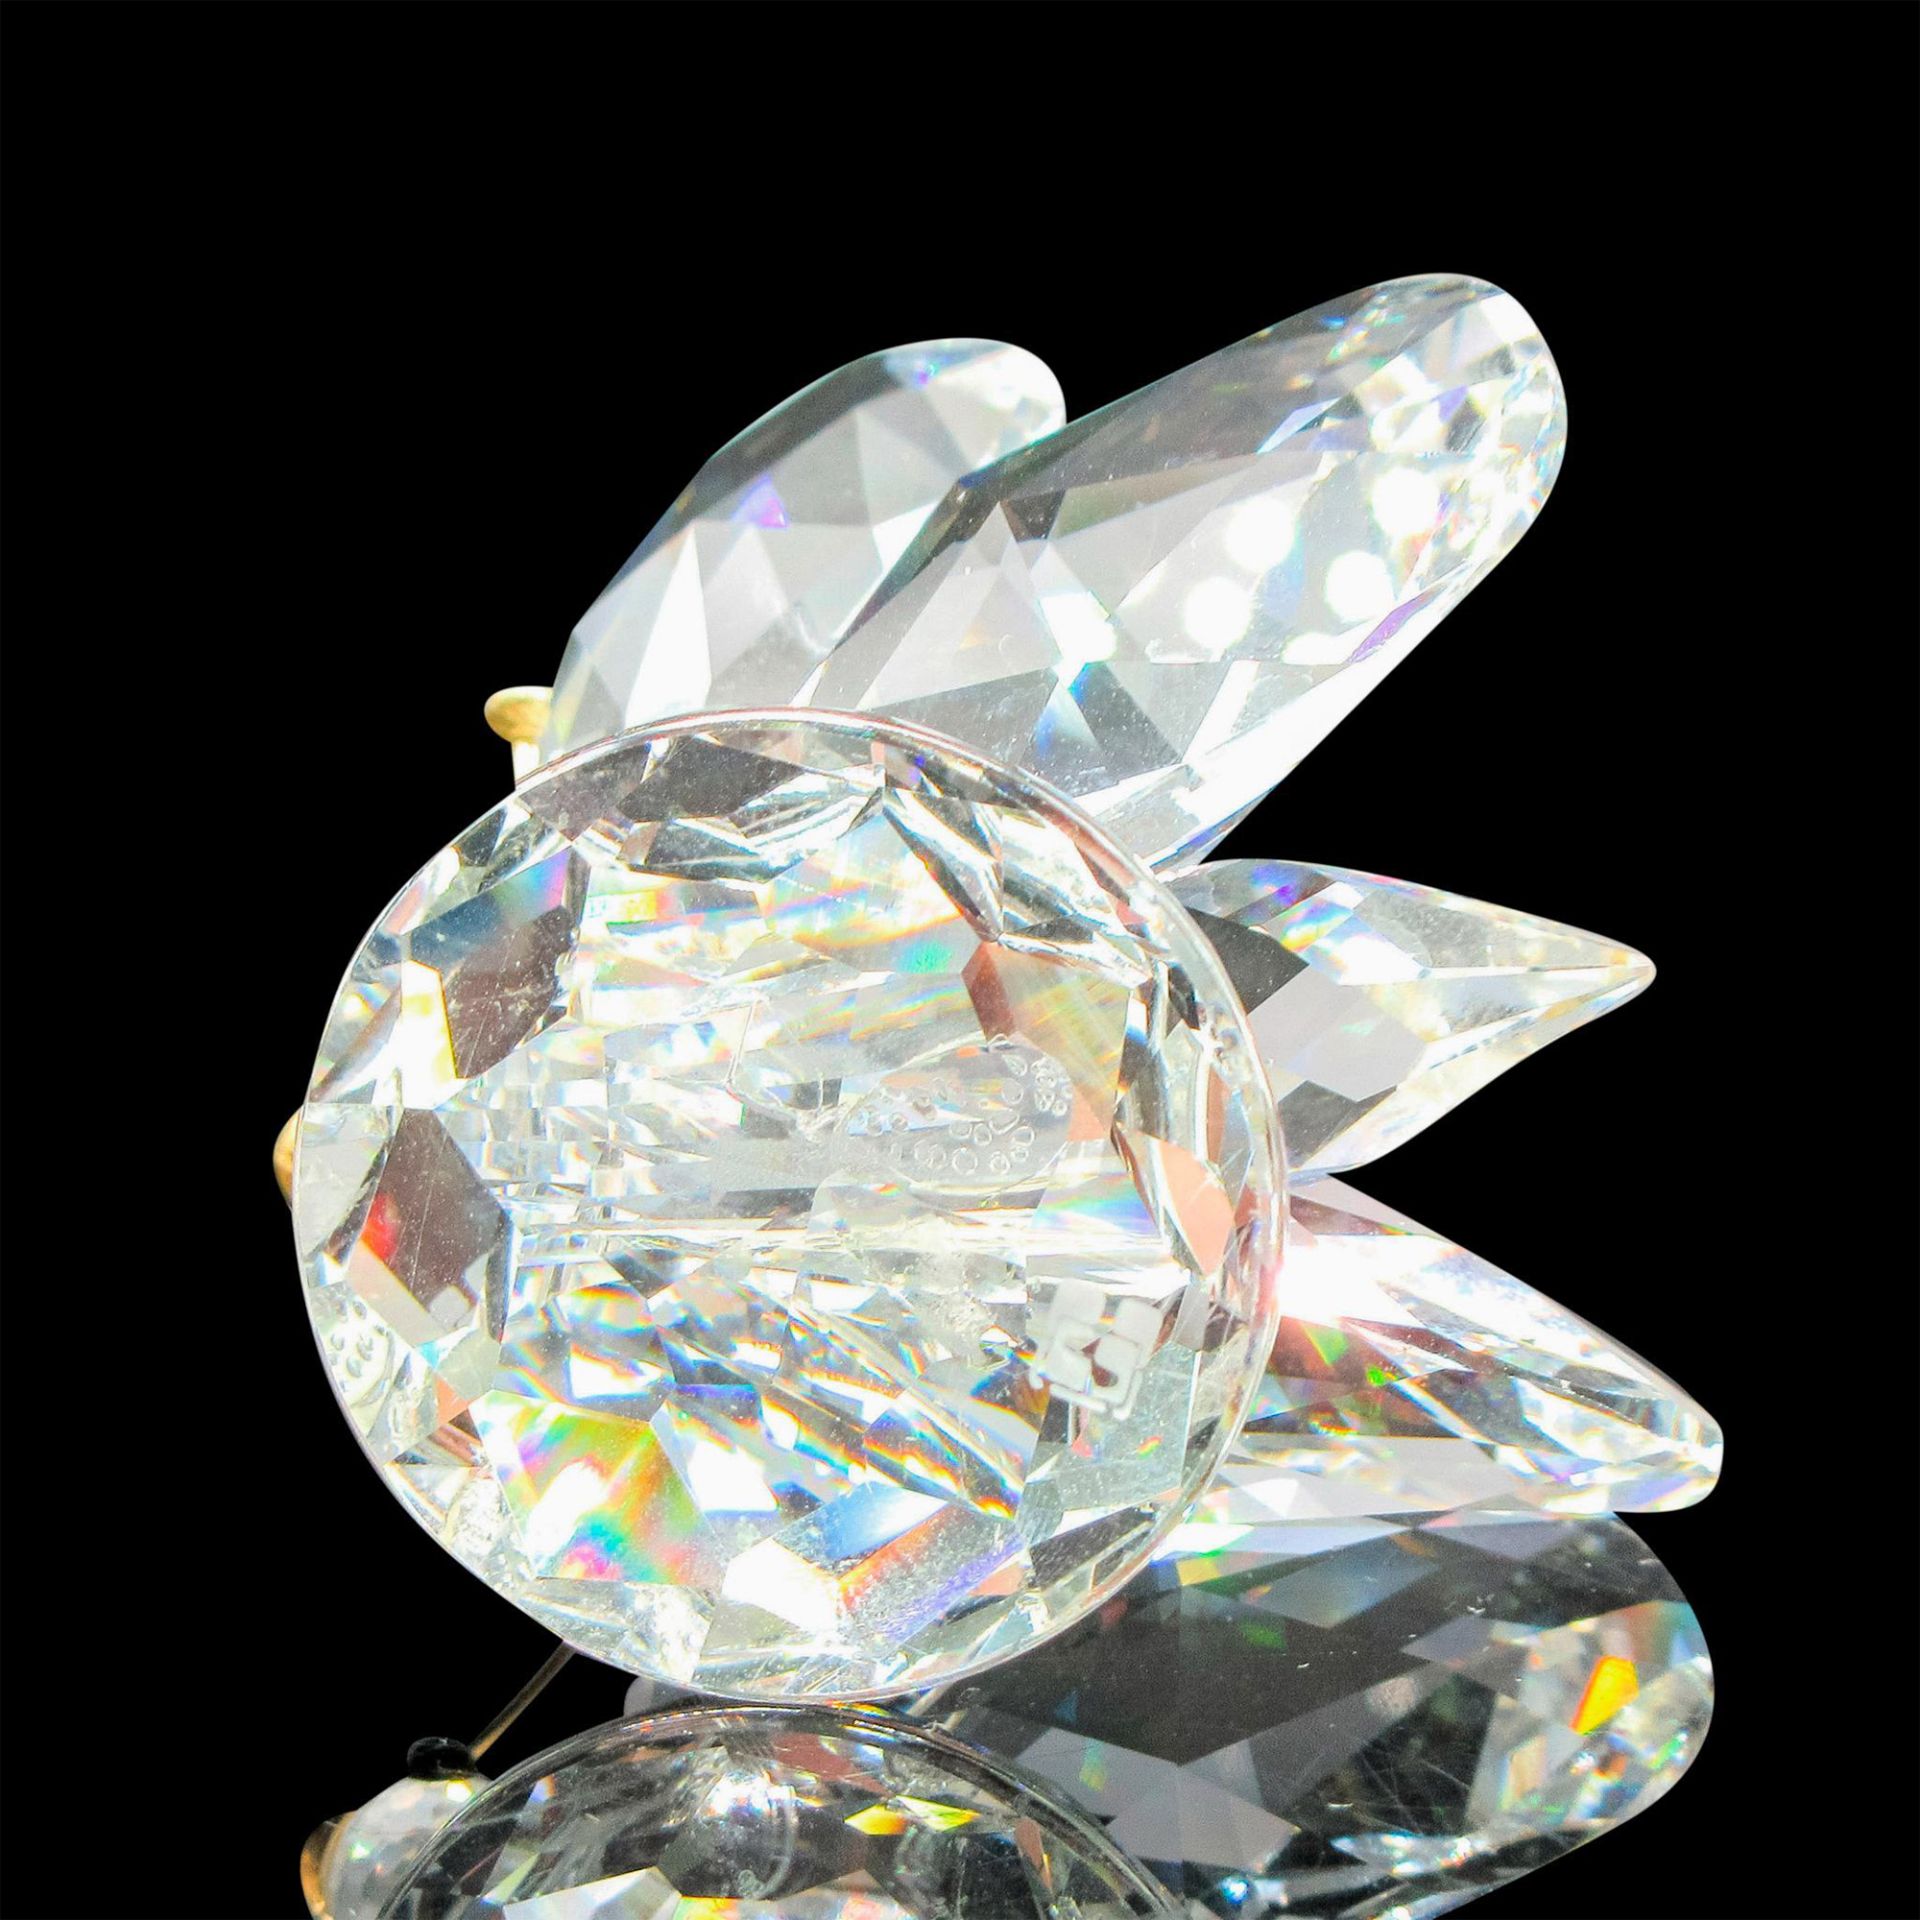 Swarovski Crystal Figurine, Butterfly with Gold Antennae - Image 4 of 4